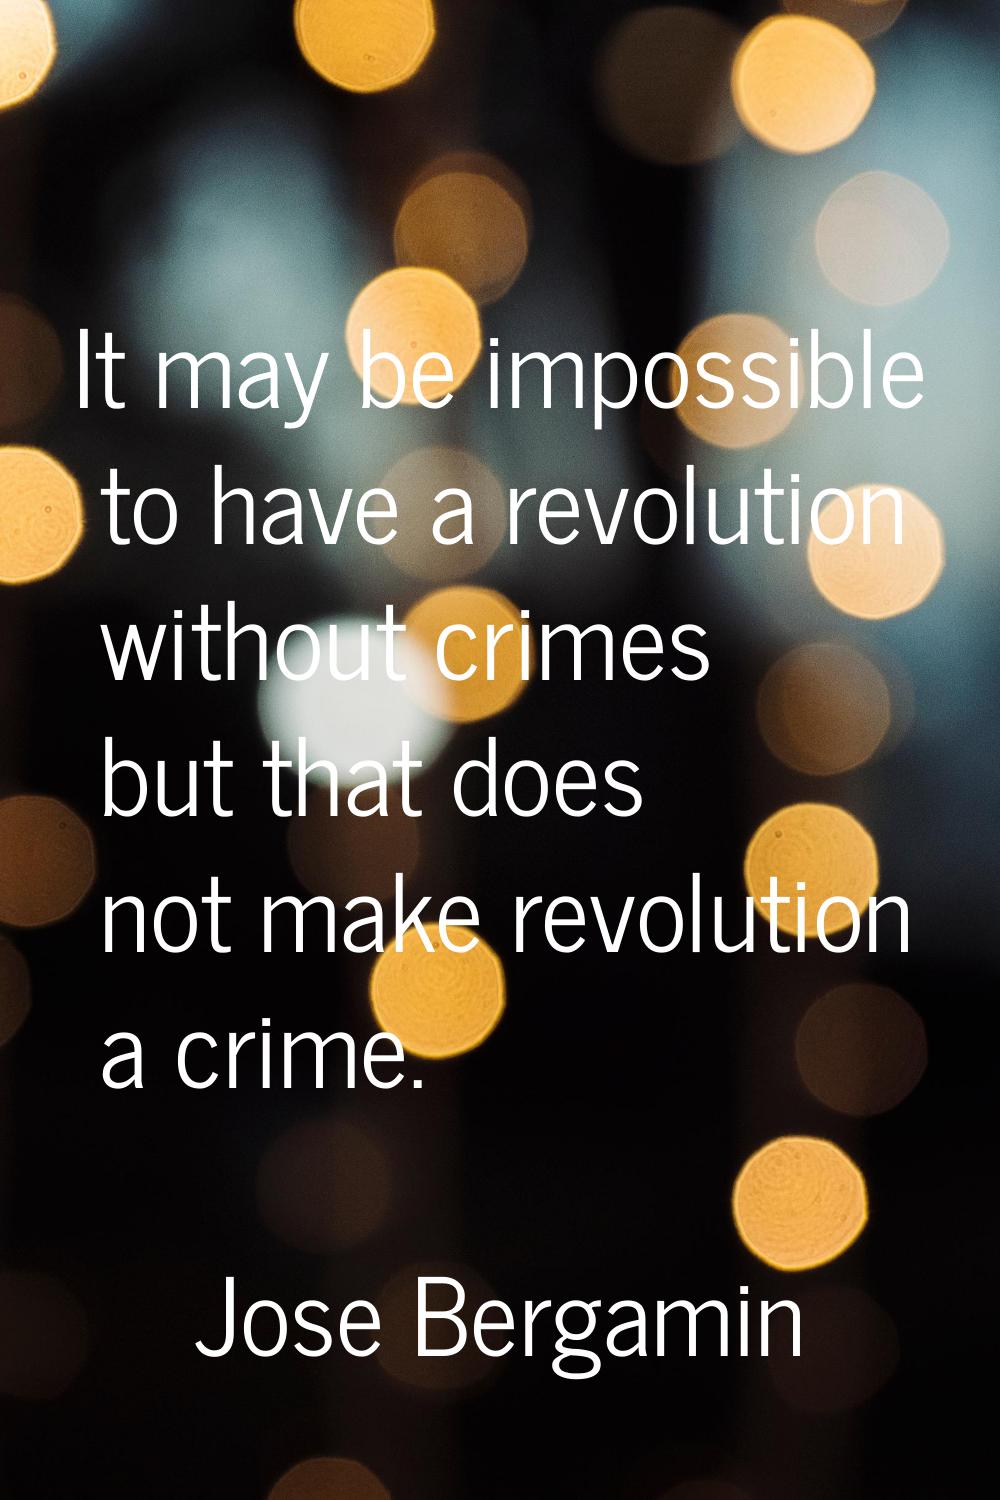 It may be impossible to have a revolution without crimes but that does not make revolution a crime.